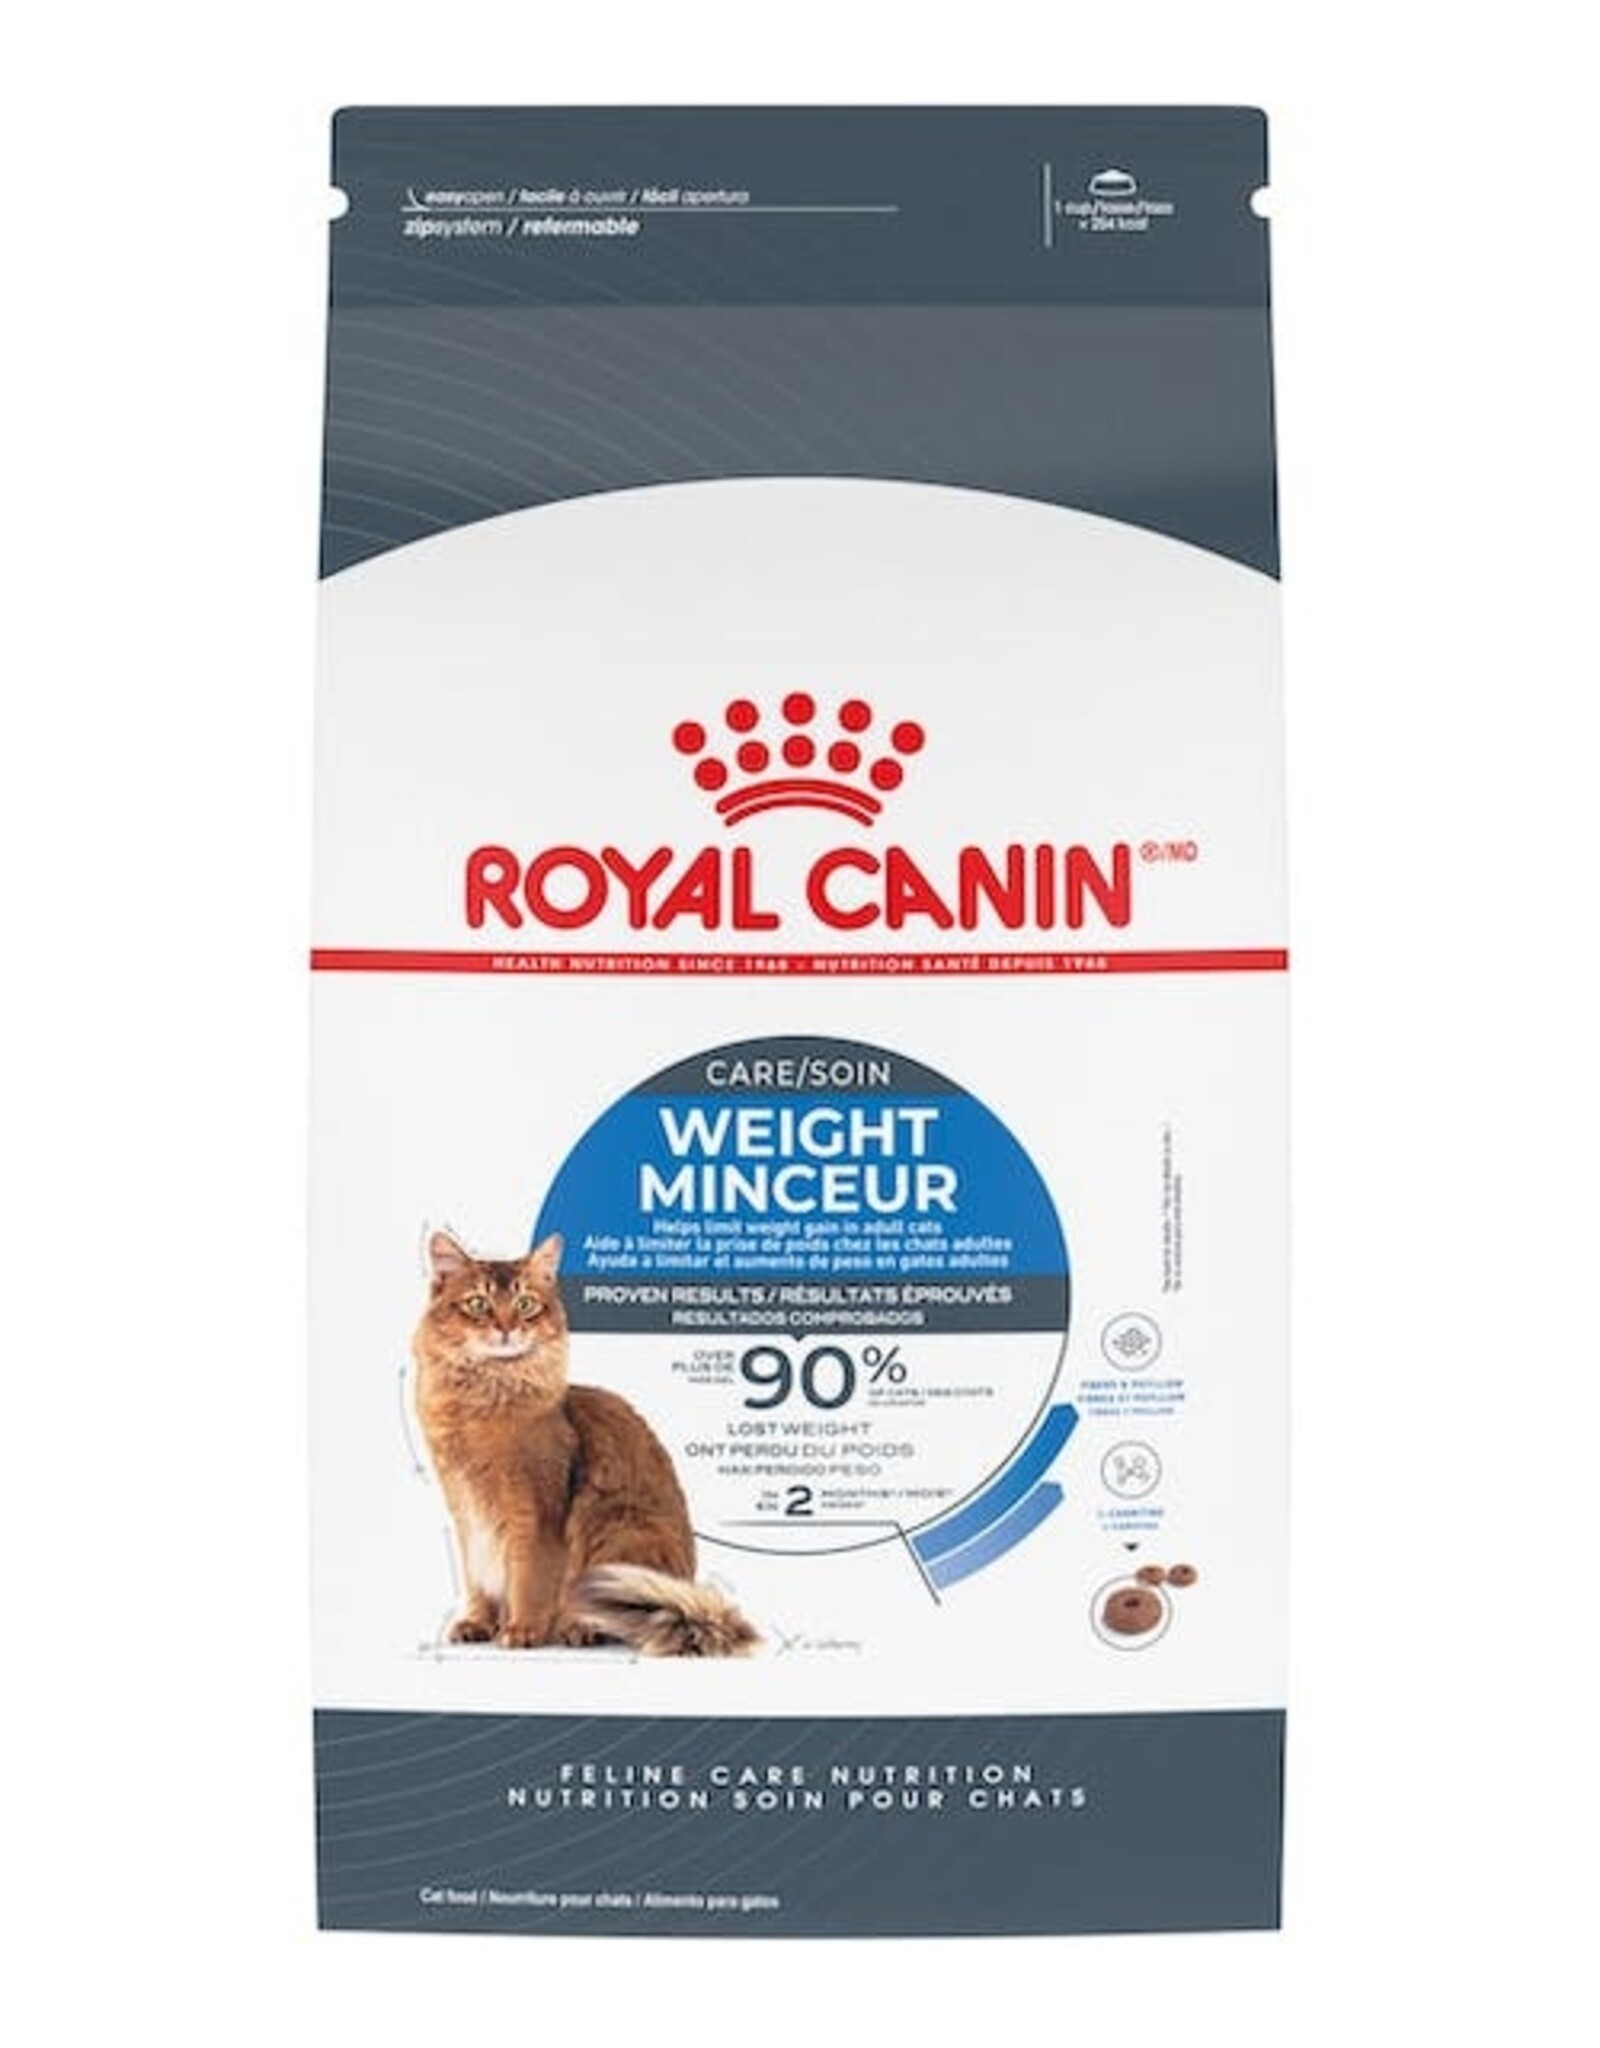 ROYAL CANIN ROYAL CANIN CAT WEIGHT CARE 40% 6LBS